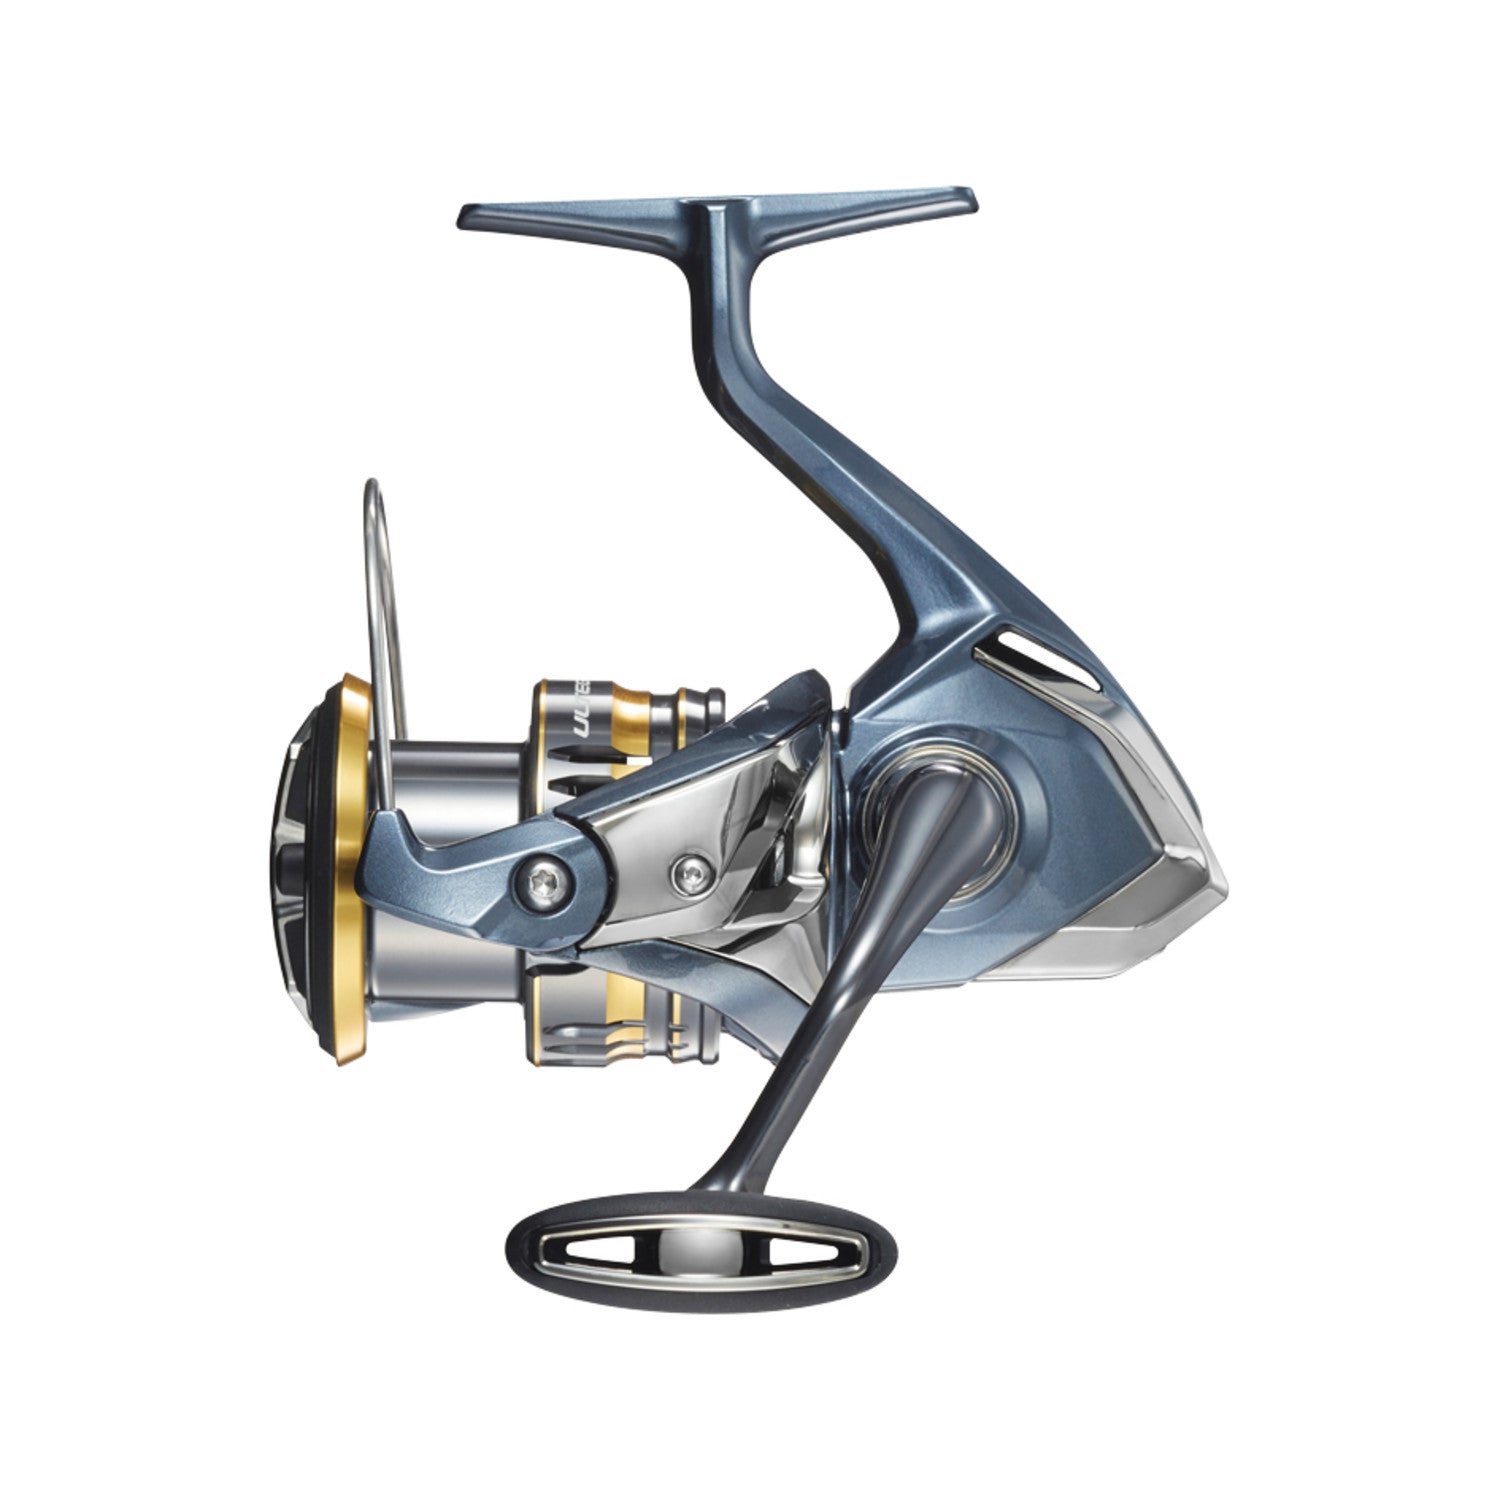  GOMEXUS Double Handle, Spinning Reel, Shimano, 19 Stradic  3000, Made of Duralumin, 3.9 inches (98 mm) : Sports & Outdoors